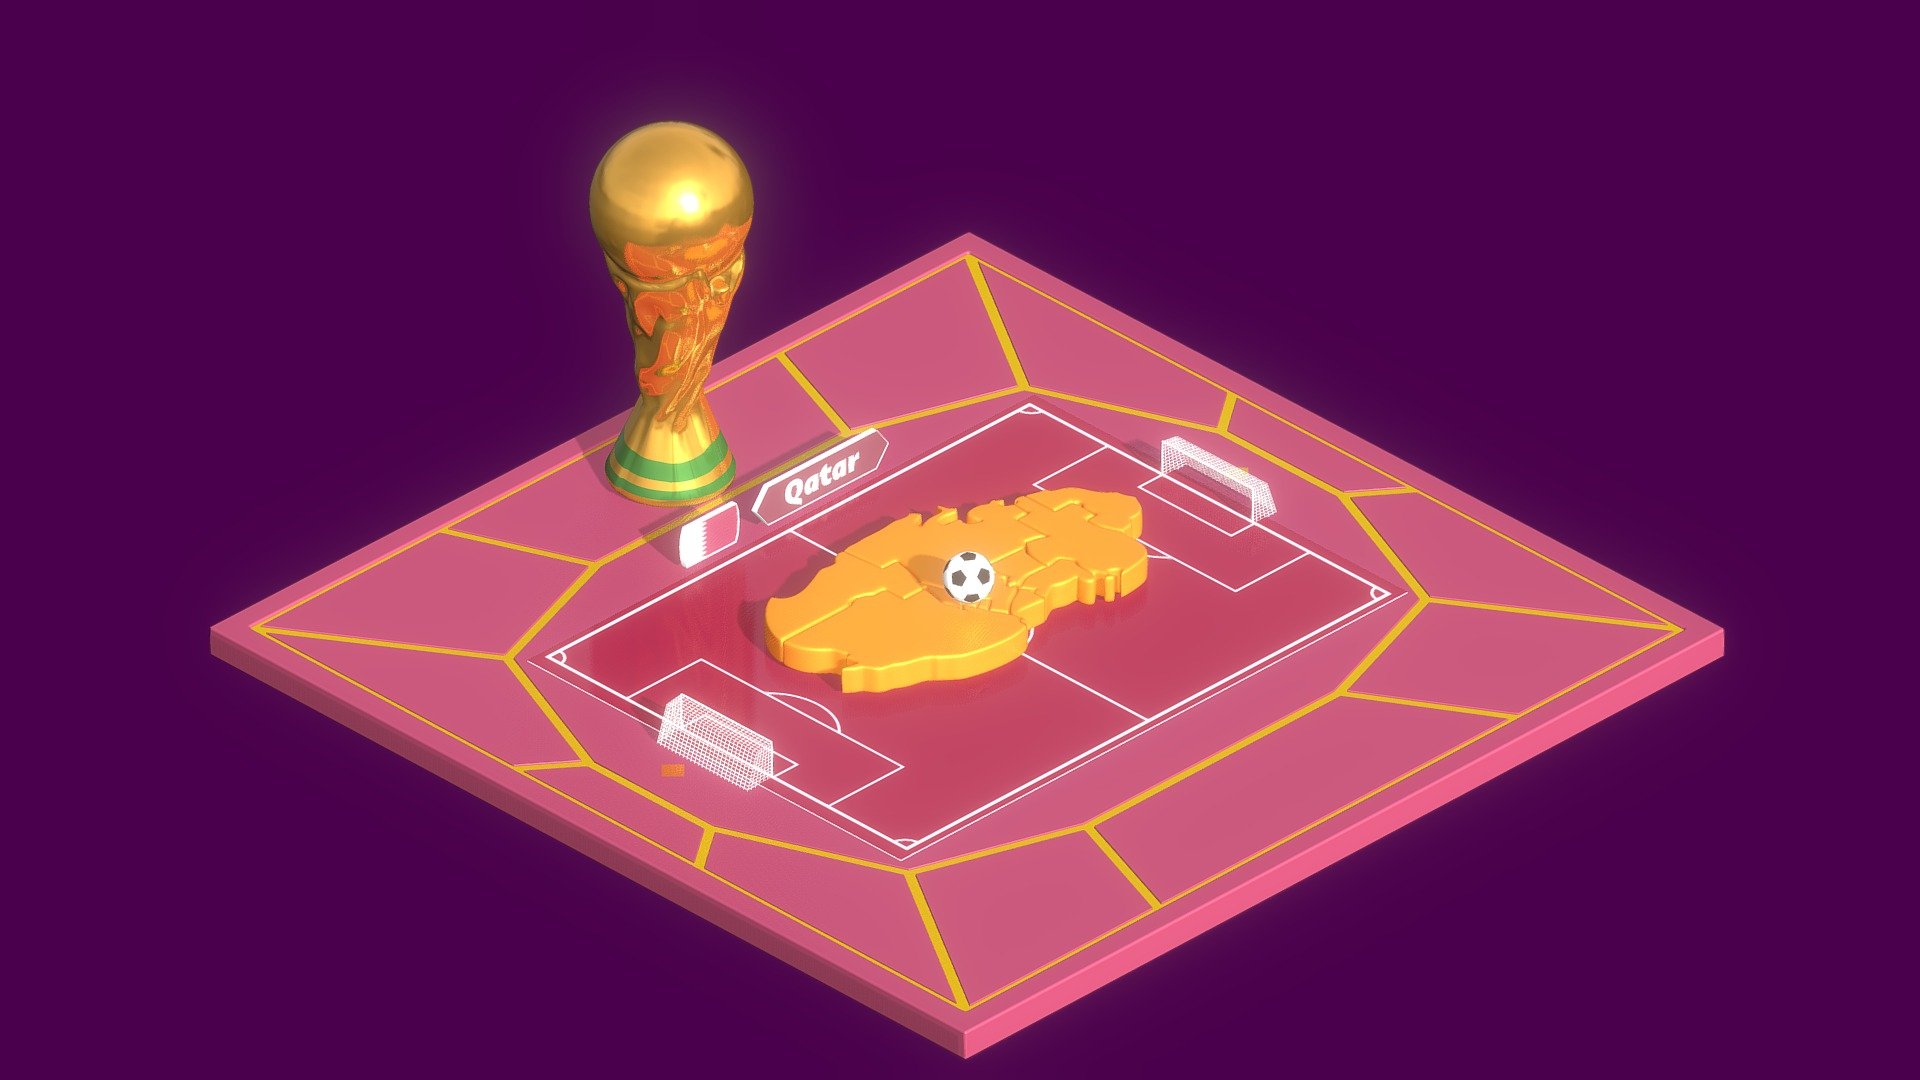 3D model FIFA World Cup 2022 Logo and Trophy Qatar VR / AR / low-poly